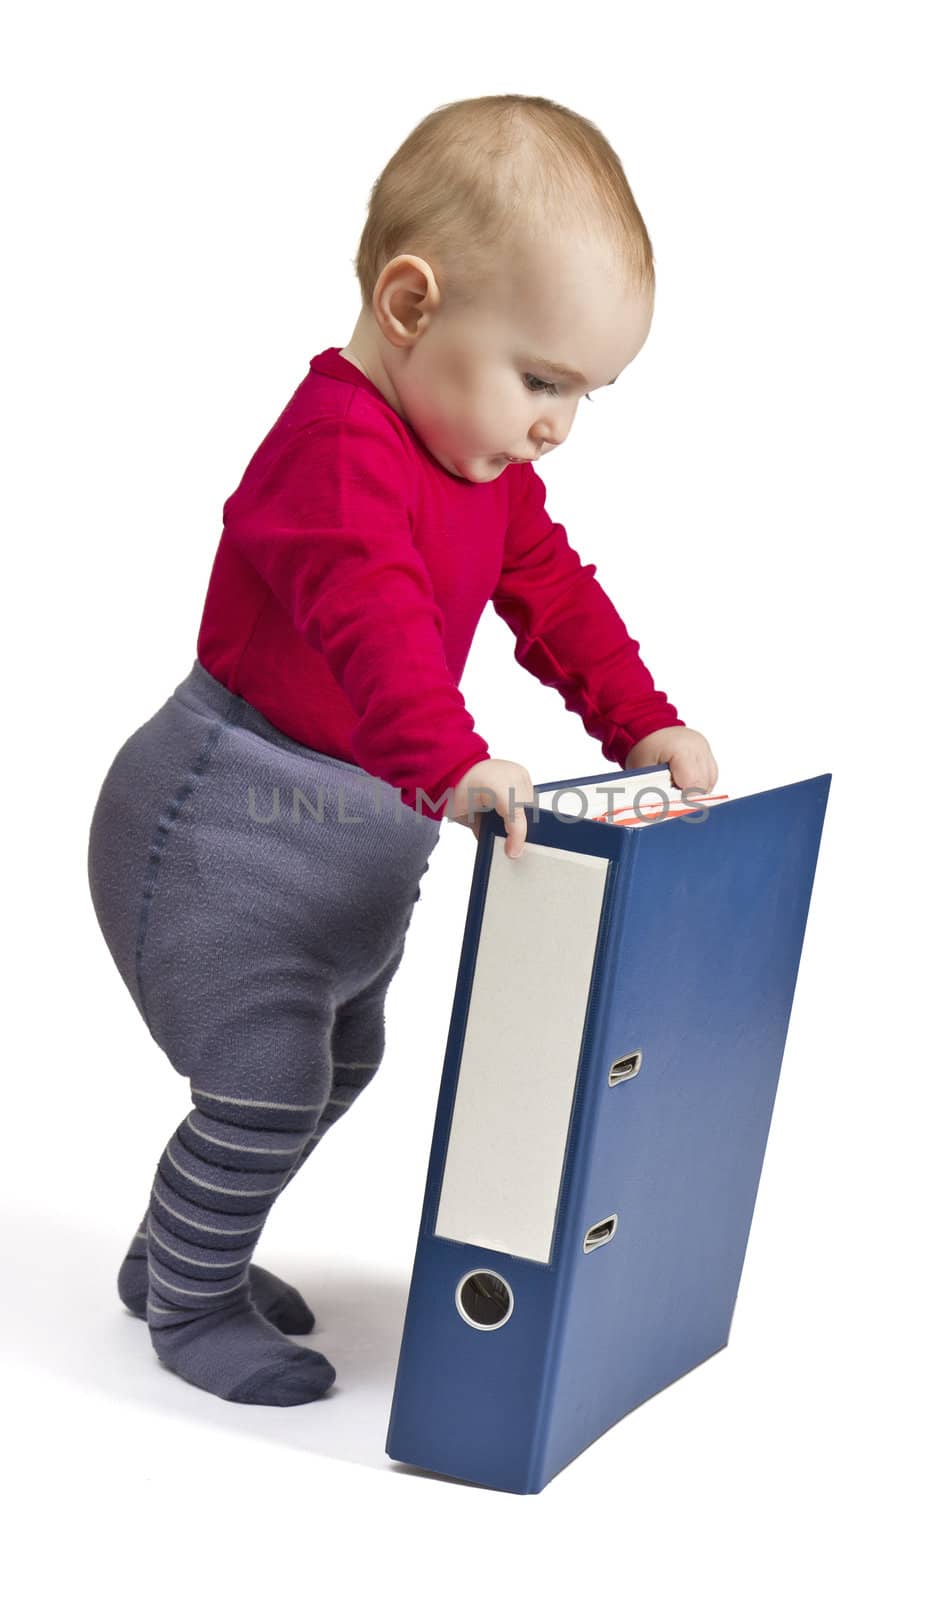 small child in red shirt standing next to blue ring binder. white background with shadow